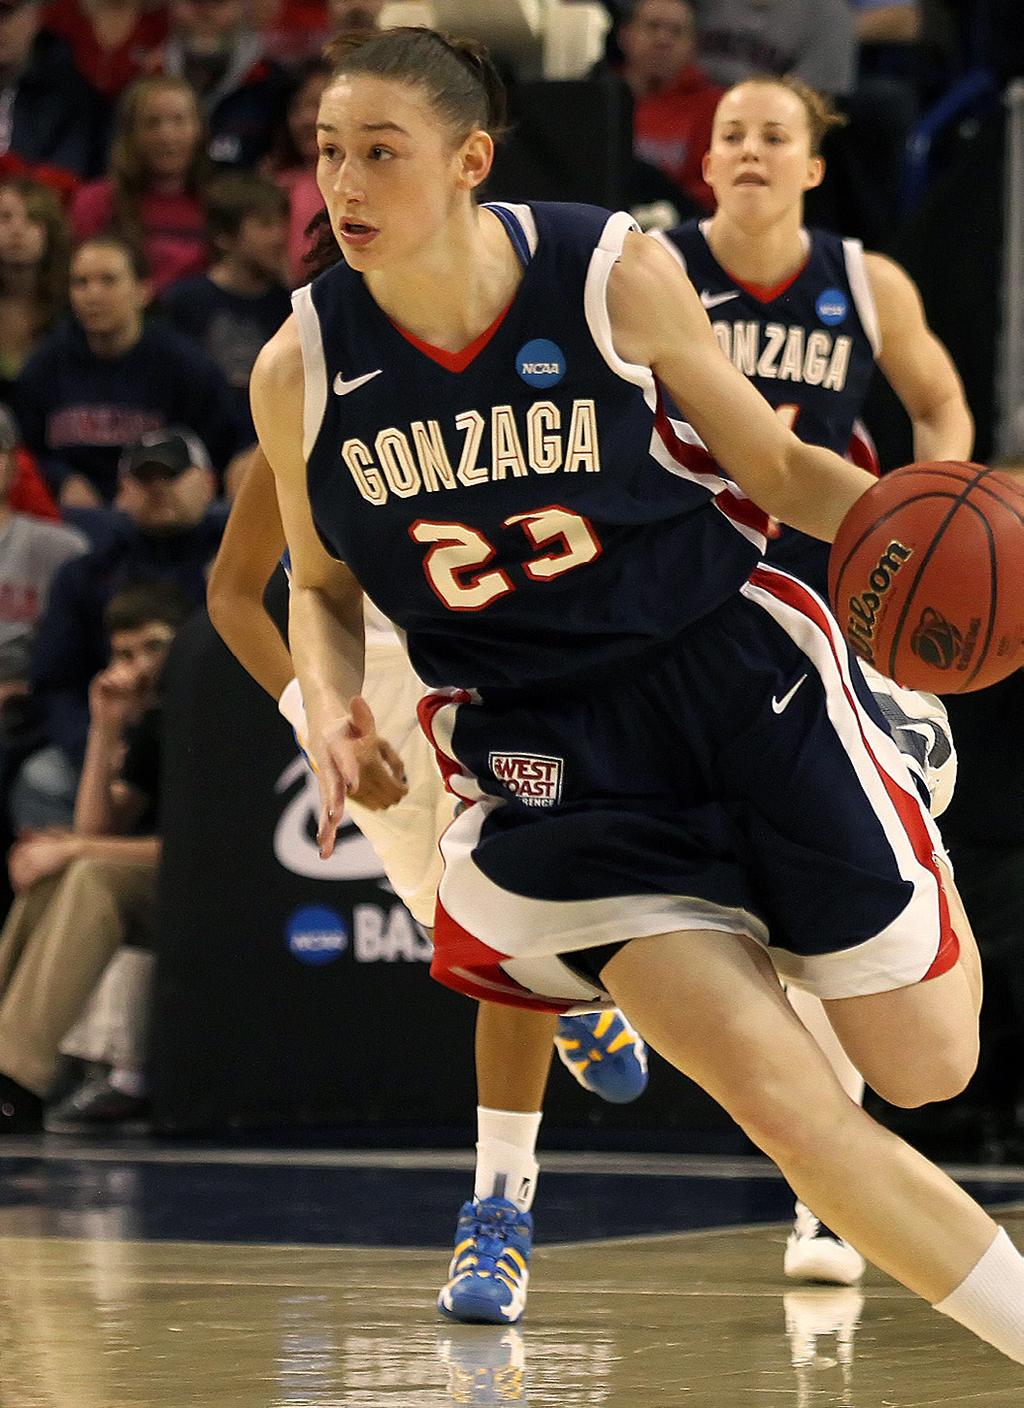 The Bulldogs won their unprecedented eighthstraight West Coast Conference regular-season title with a 14-2 mark but fell in the championship game of the league tournament. Gonzaga, the No.